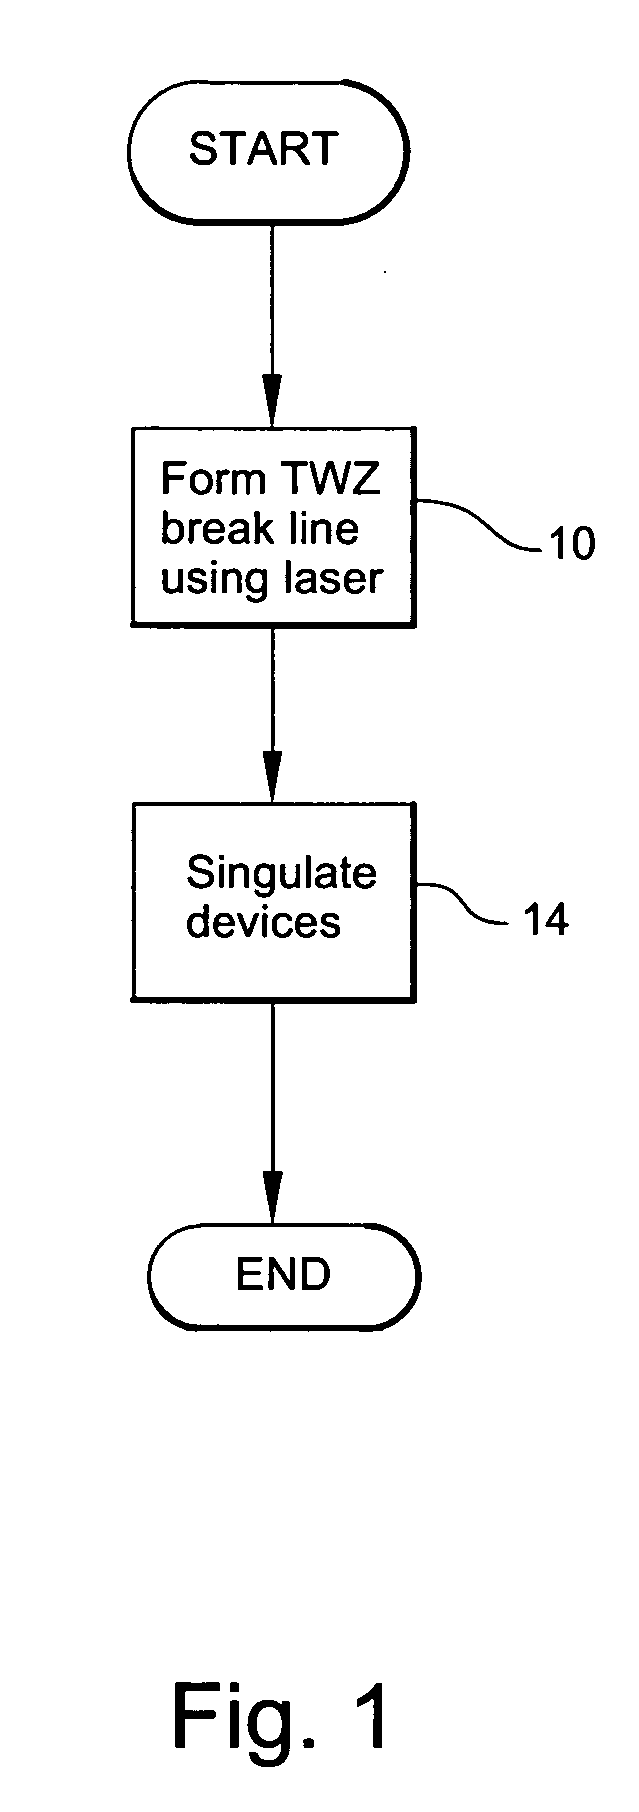 Semiconductor substrate assemblies and methods for preparing and dicing the same